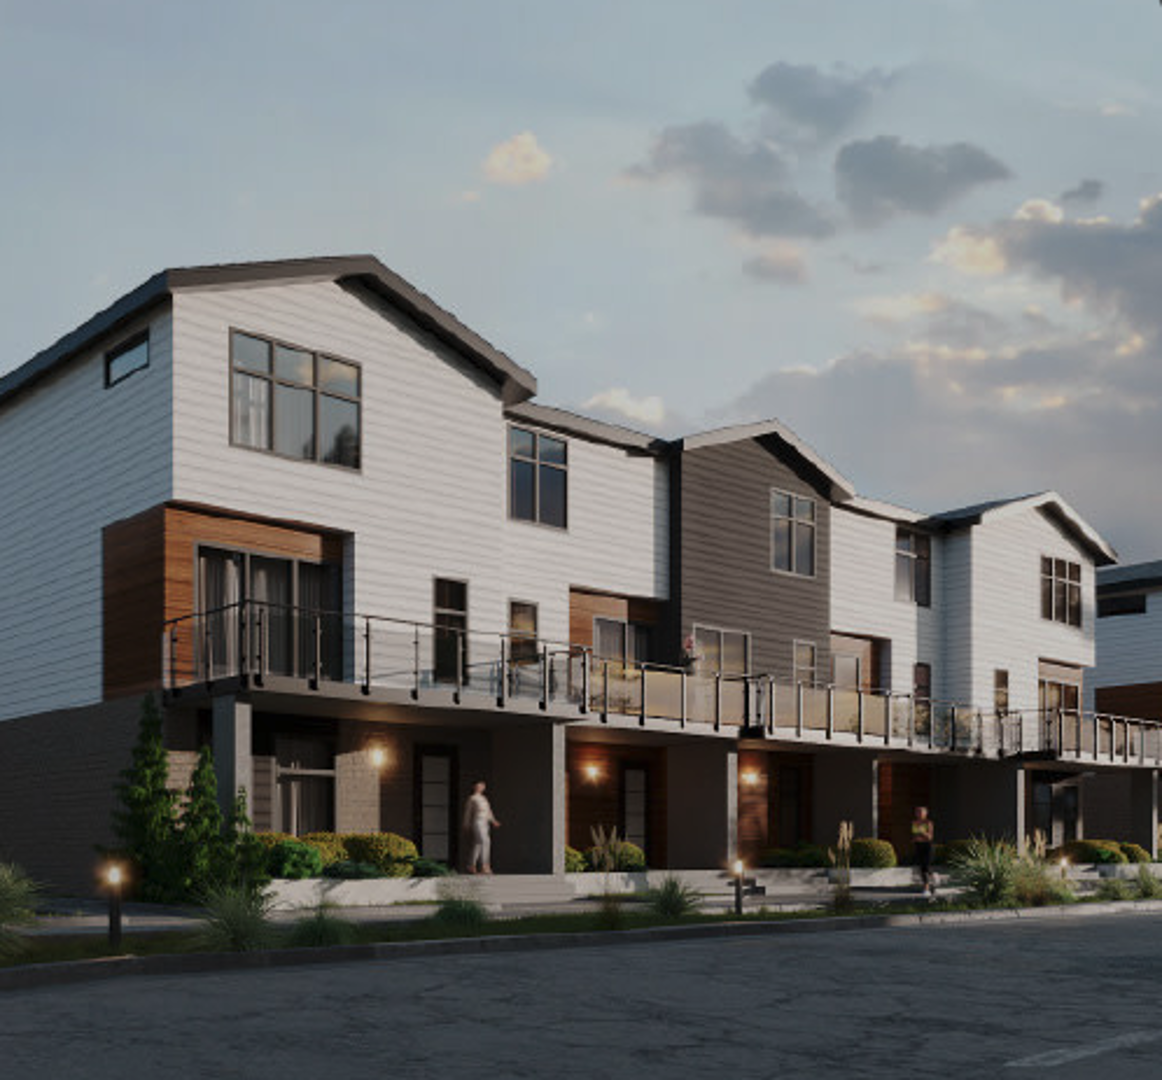 West 83 Townhomes located at 836 81 Street Southwest, Calgary, AB image